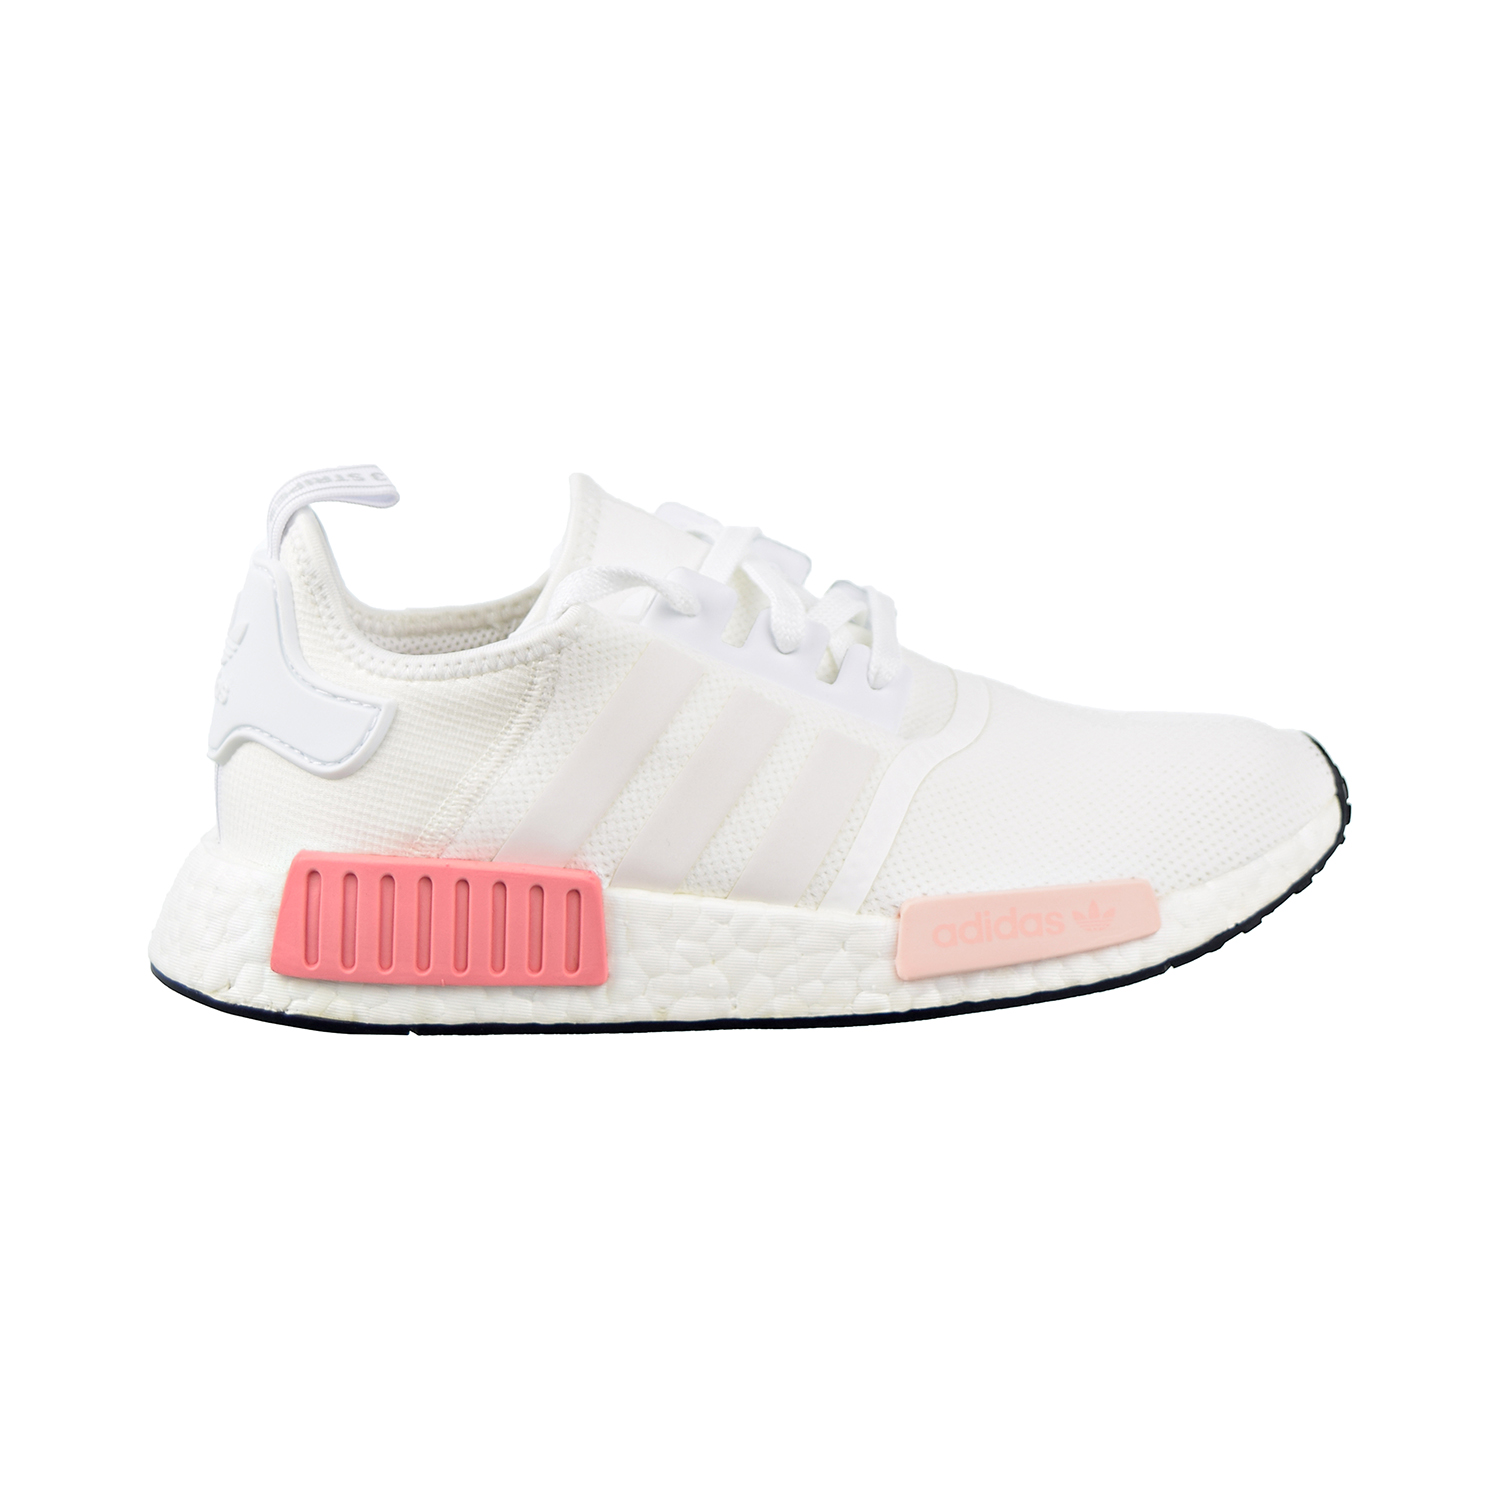 Free delivery - adidas women shoes pink 